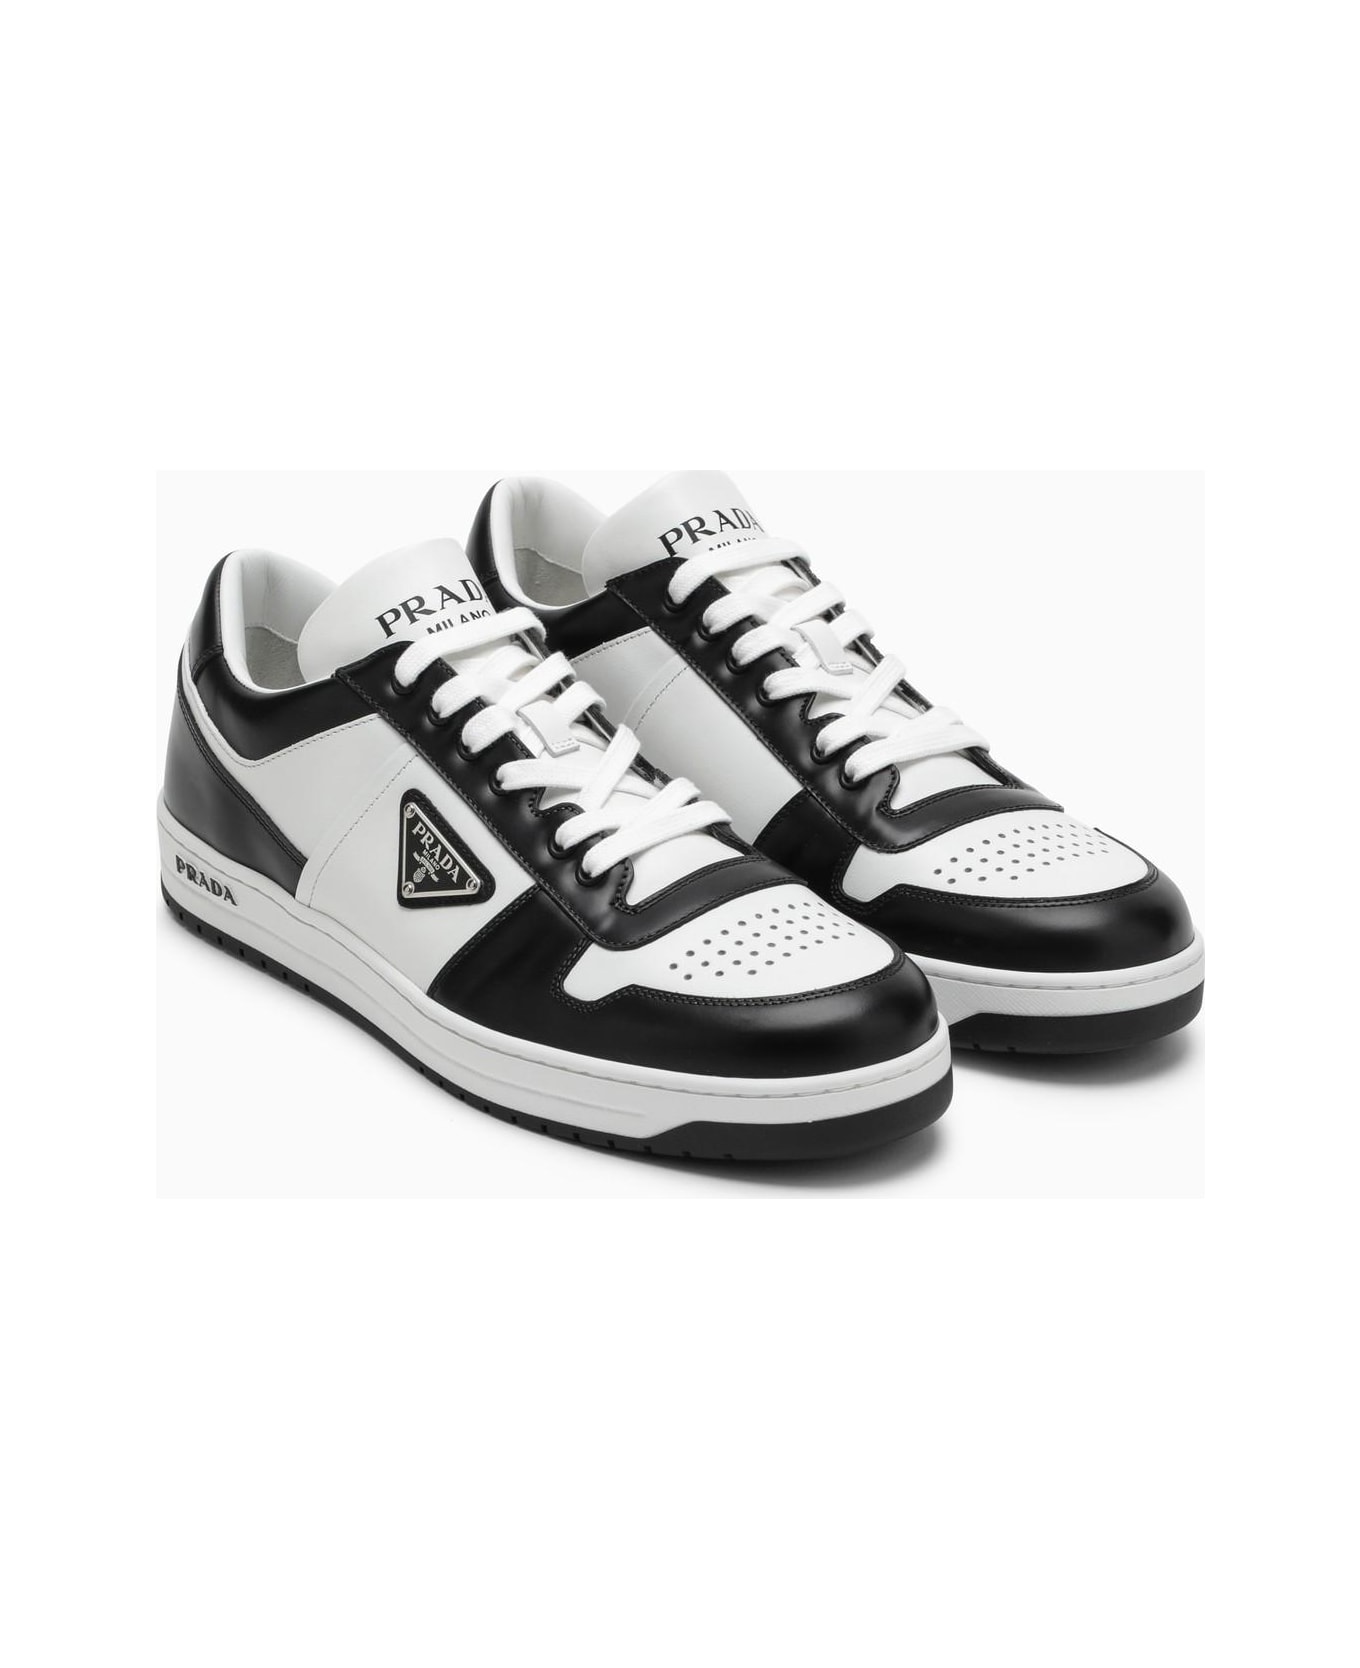 Prada White\/black Leather Holiday Low-top Sneakers - F Bianco E Nero スニーカー